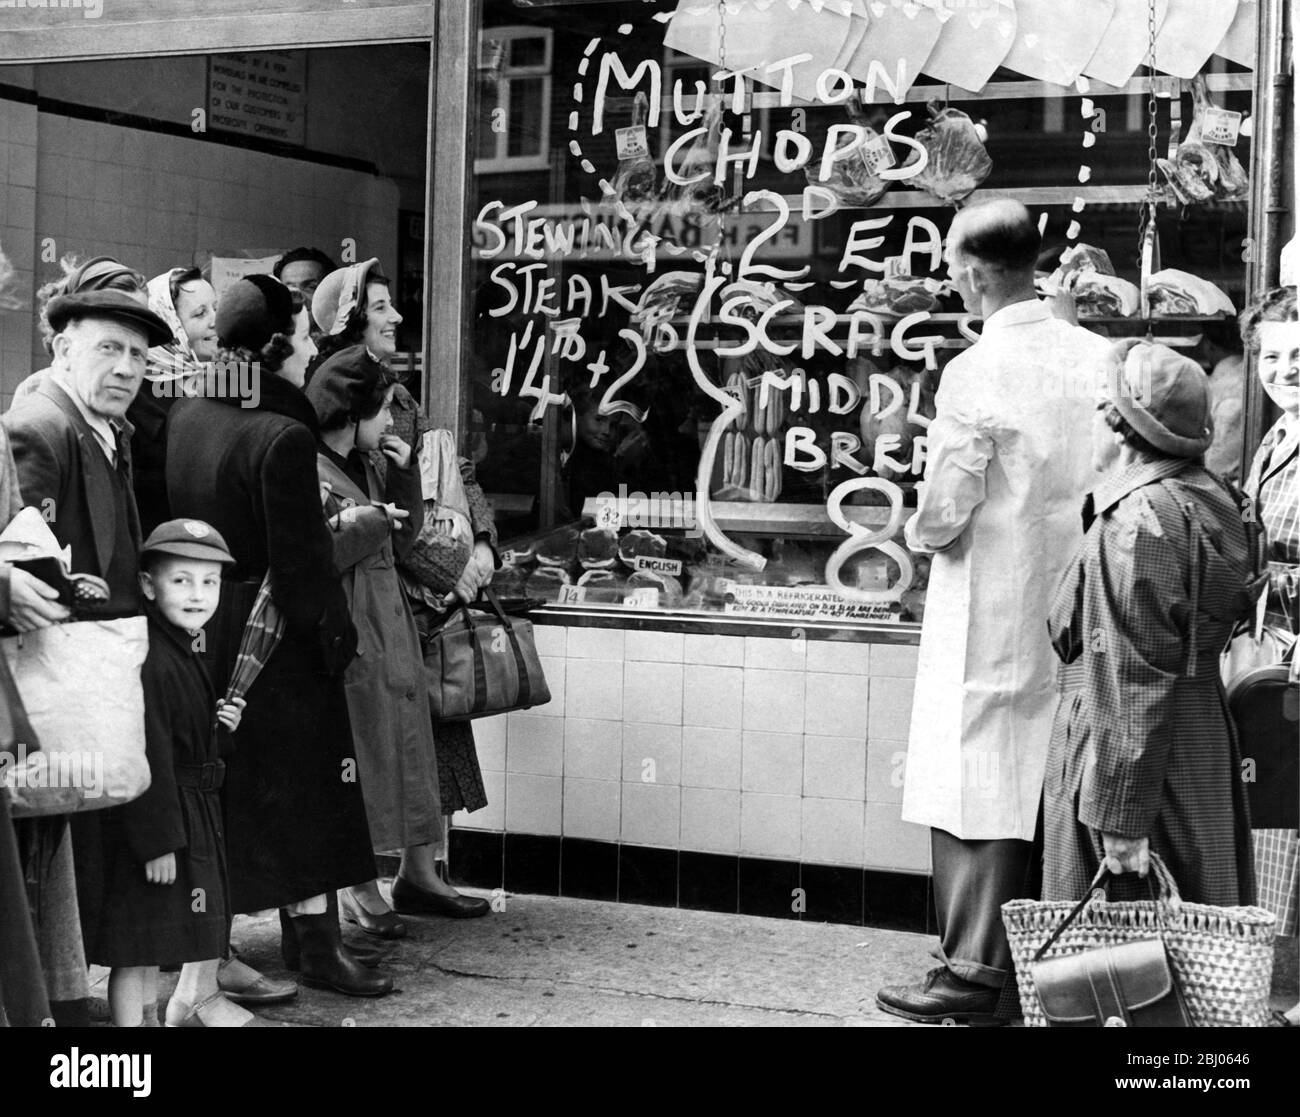 A butcher selling mutton chops for two-pence each - This notice attracted a larger crowd of house-wives all after a cheap chop dinner. The owner of the shop, Butcher John Bigwood, is out to prove to the house wife that meat is to be had by all for prices wel below the old controlled prices. - 1954 - Stock Photo